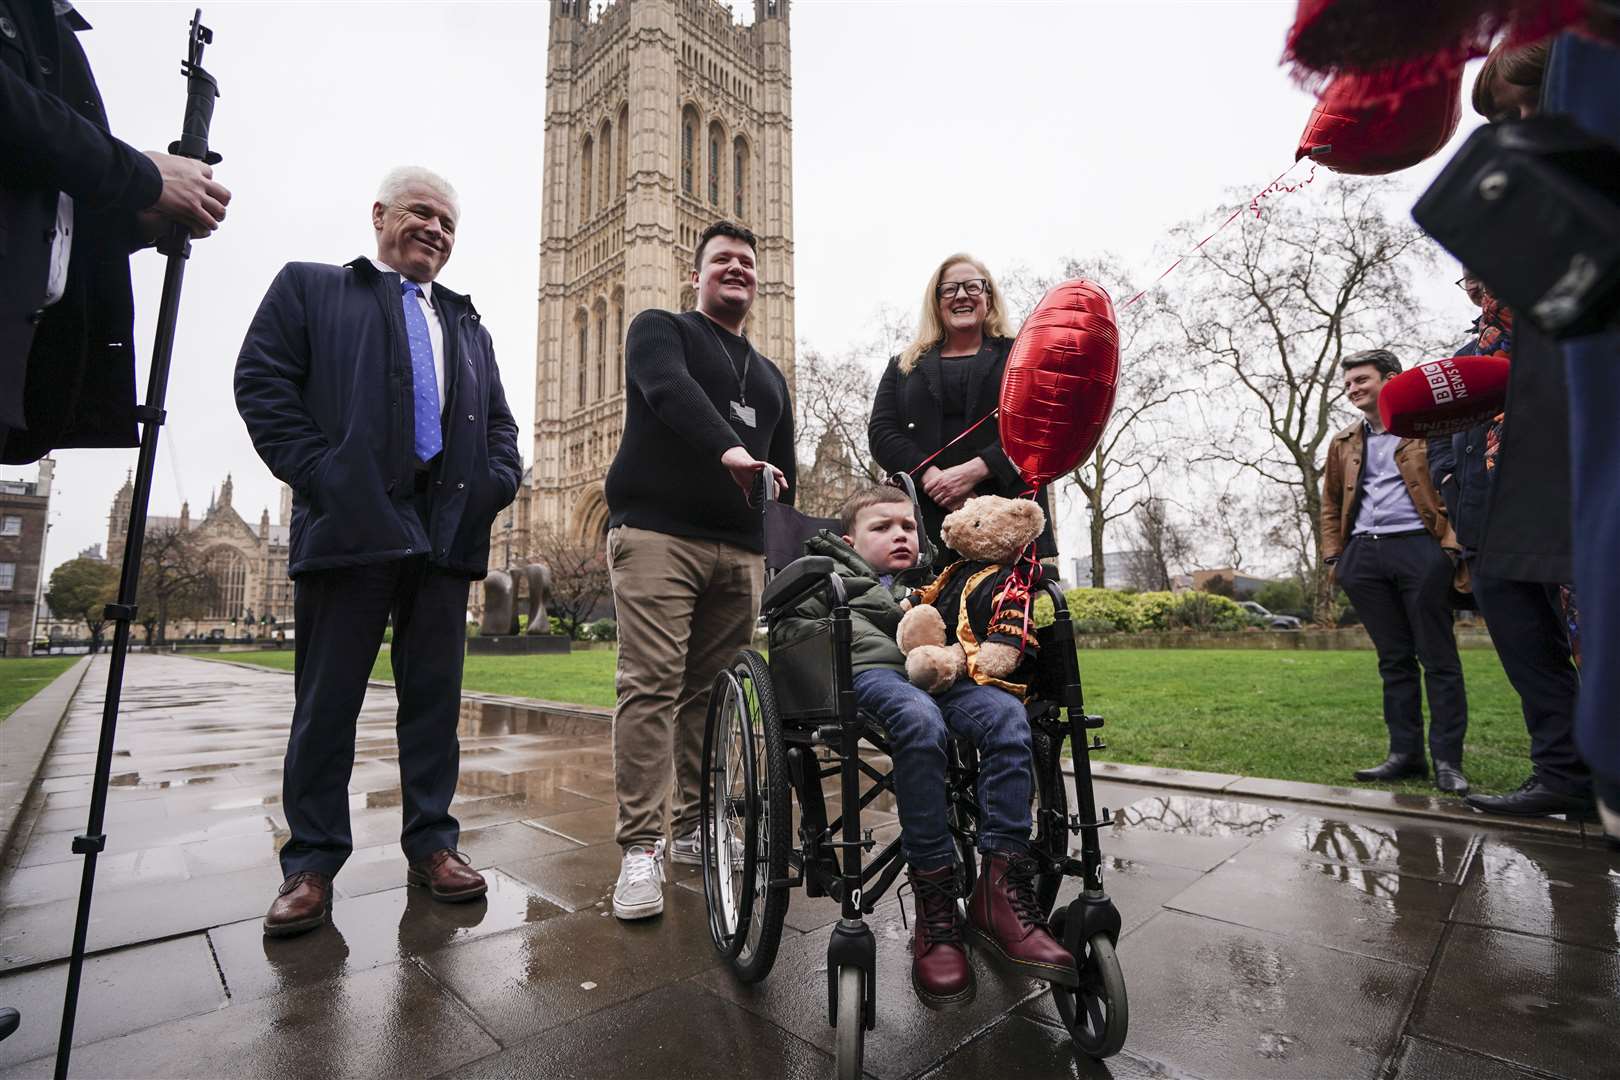 Daithi MacGabhann, six, and his father Mairtin, centre, outside the Houses of Parliament in London (Jordan Pettitt/PA)